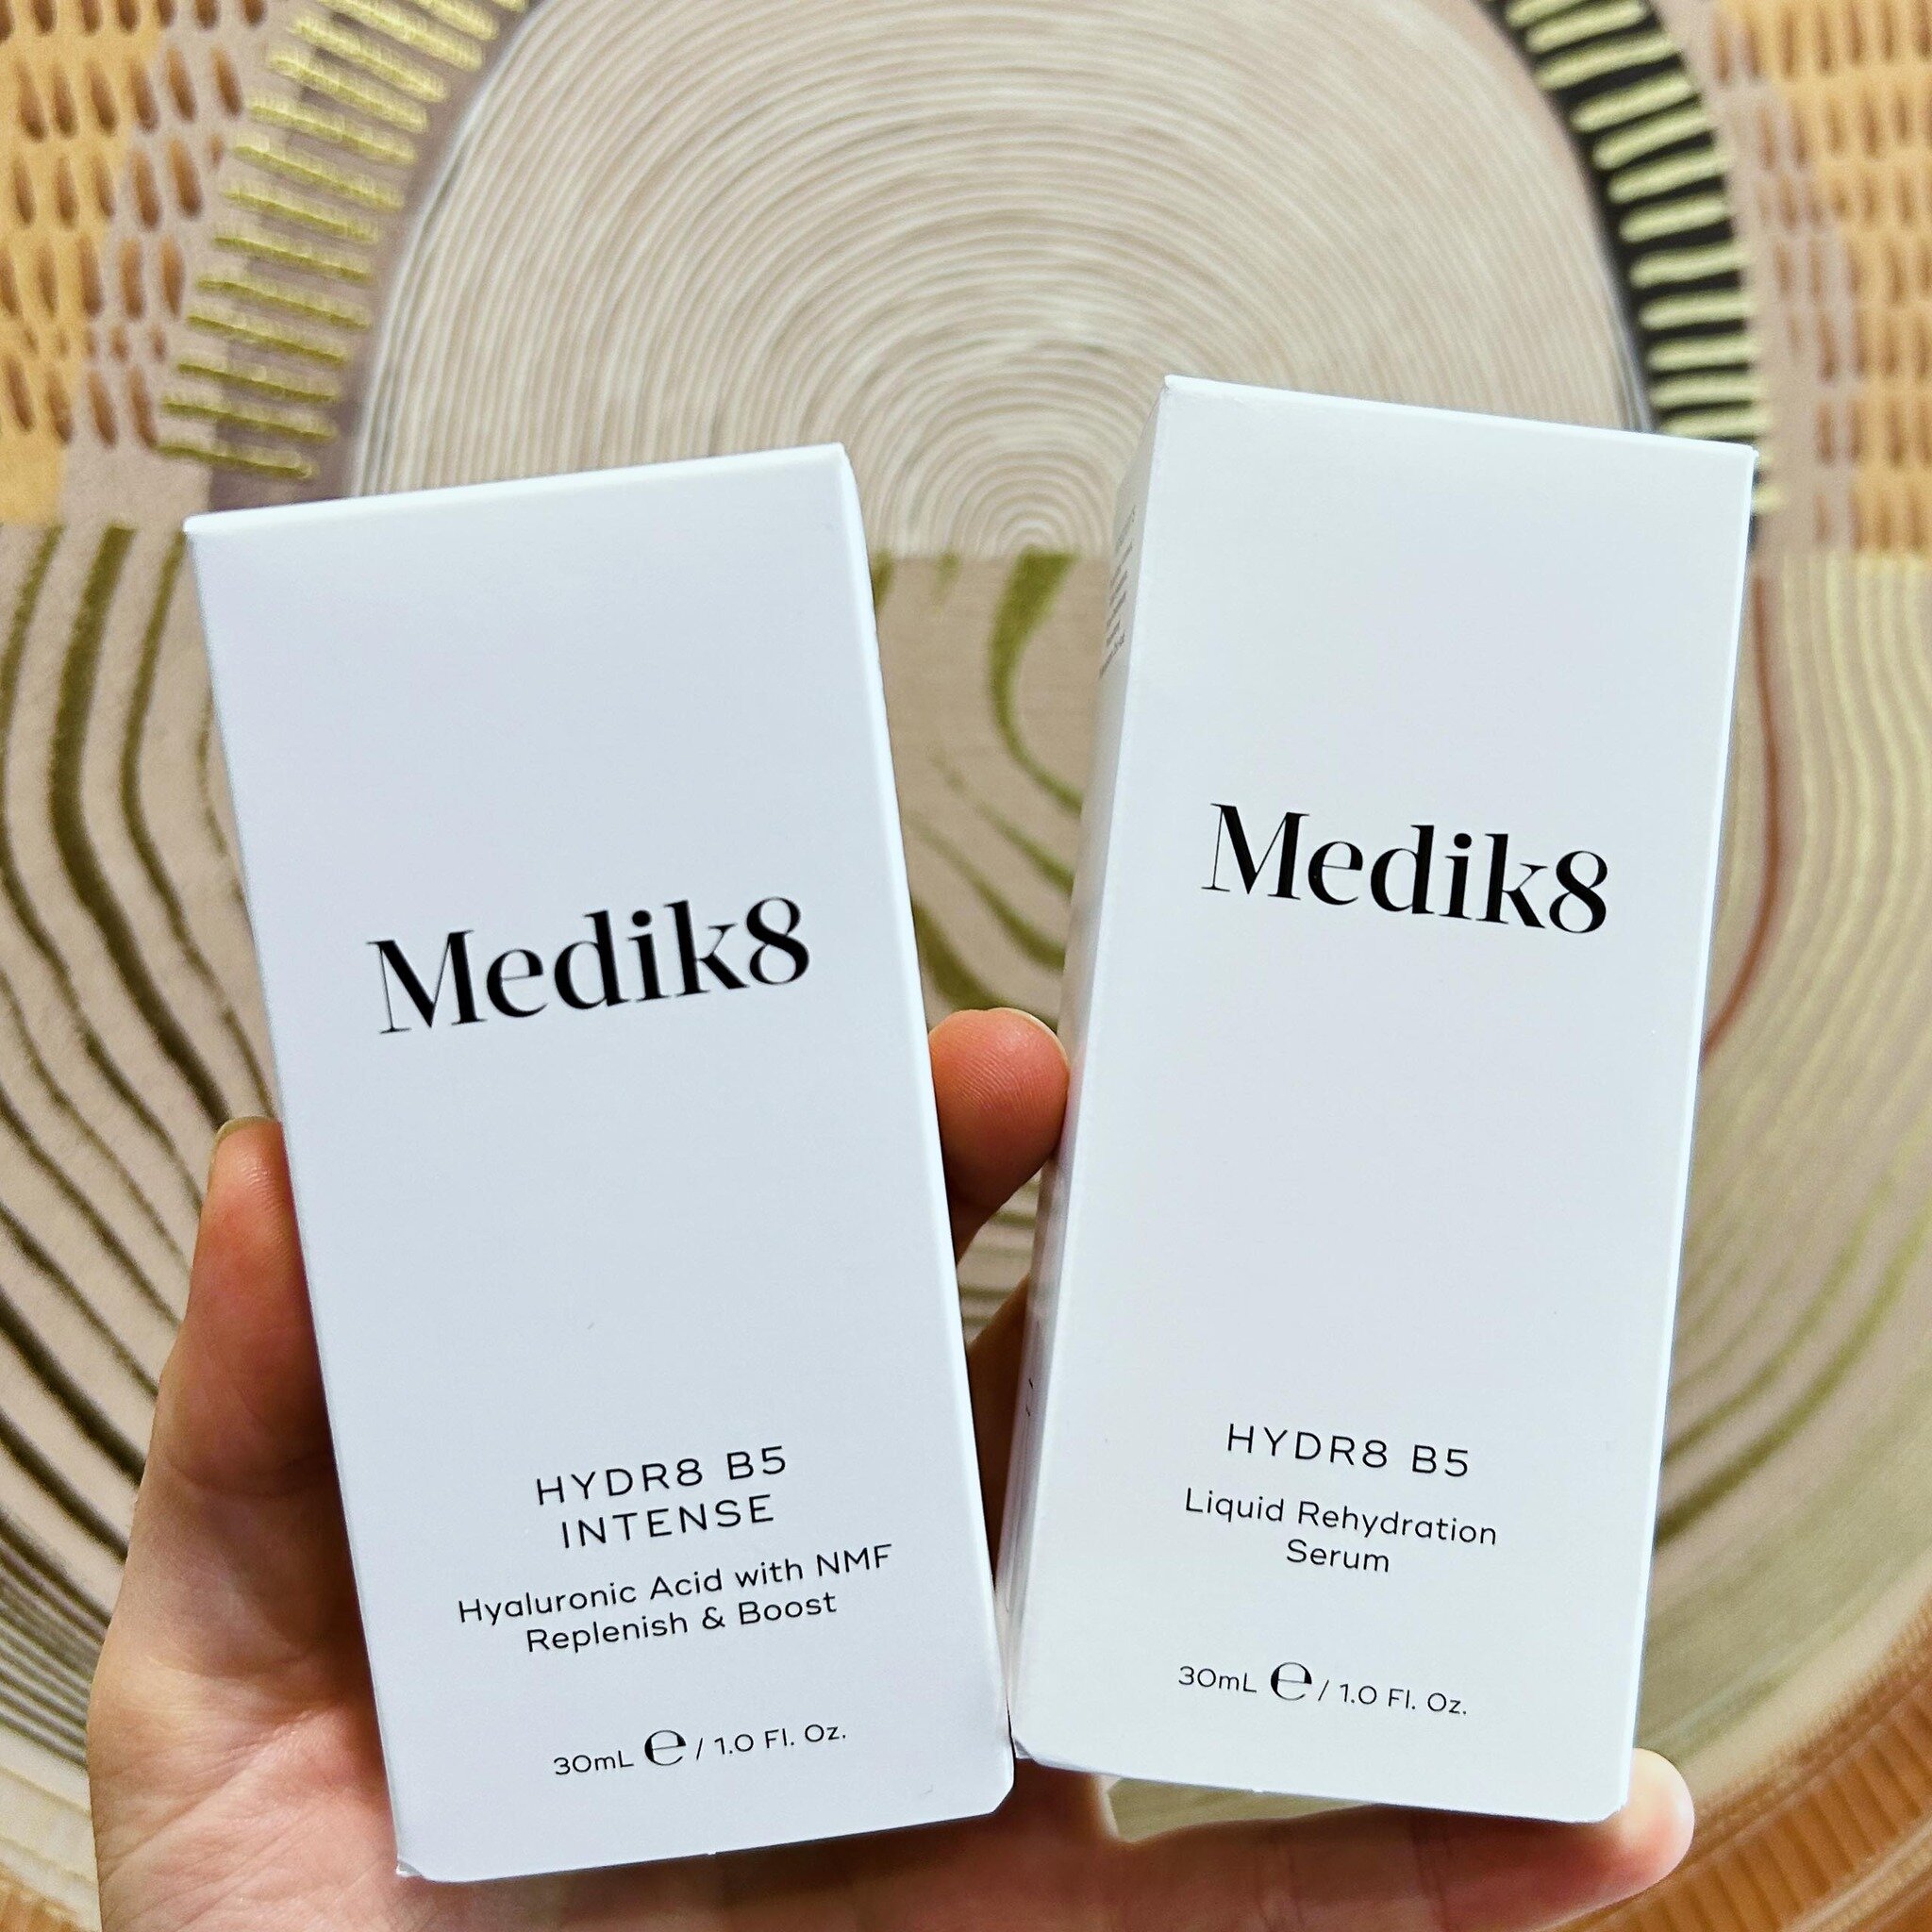 Winter can be just as harsh on our skin as summer, artificial heating can be very drying for the skin. Medik8 hydrators are the perfect solution, adding the perfect amount of weightless hydration for all skin types.